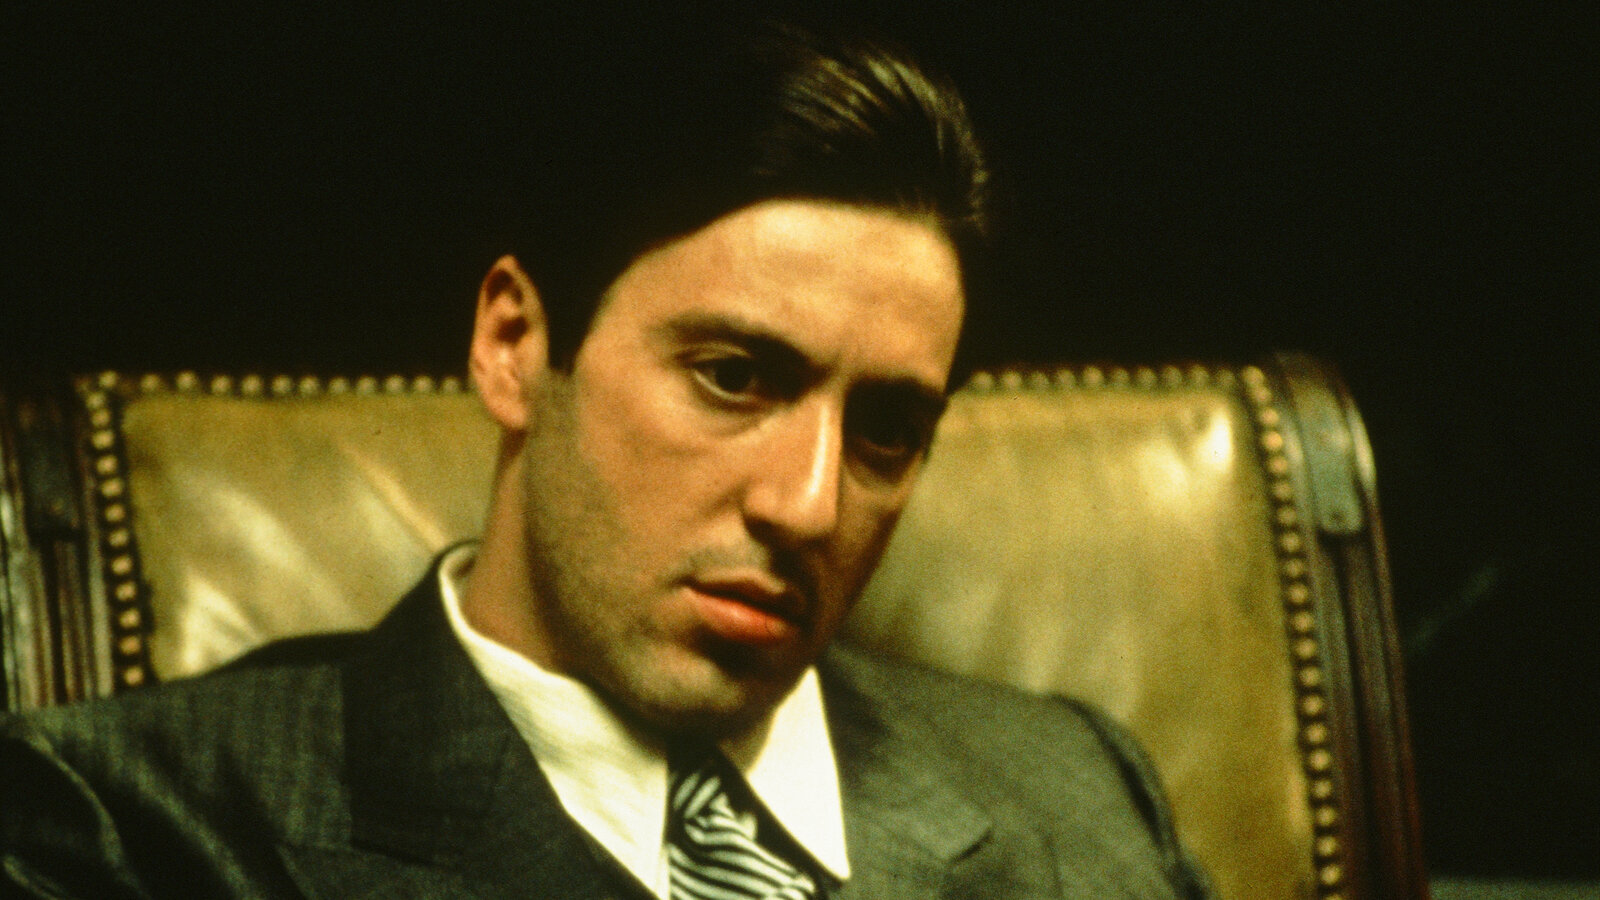 what is the one thing that history has taught us according to michael corleone al pacino in the godfather part ii 1974